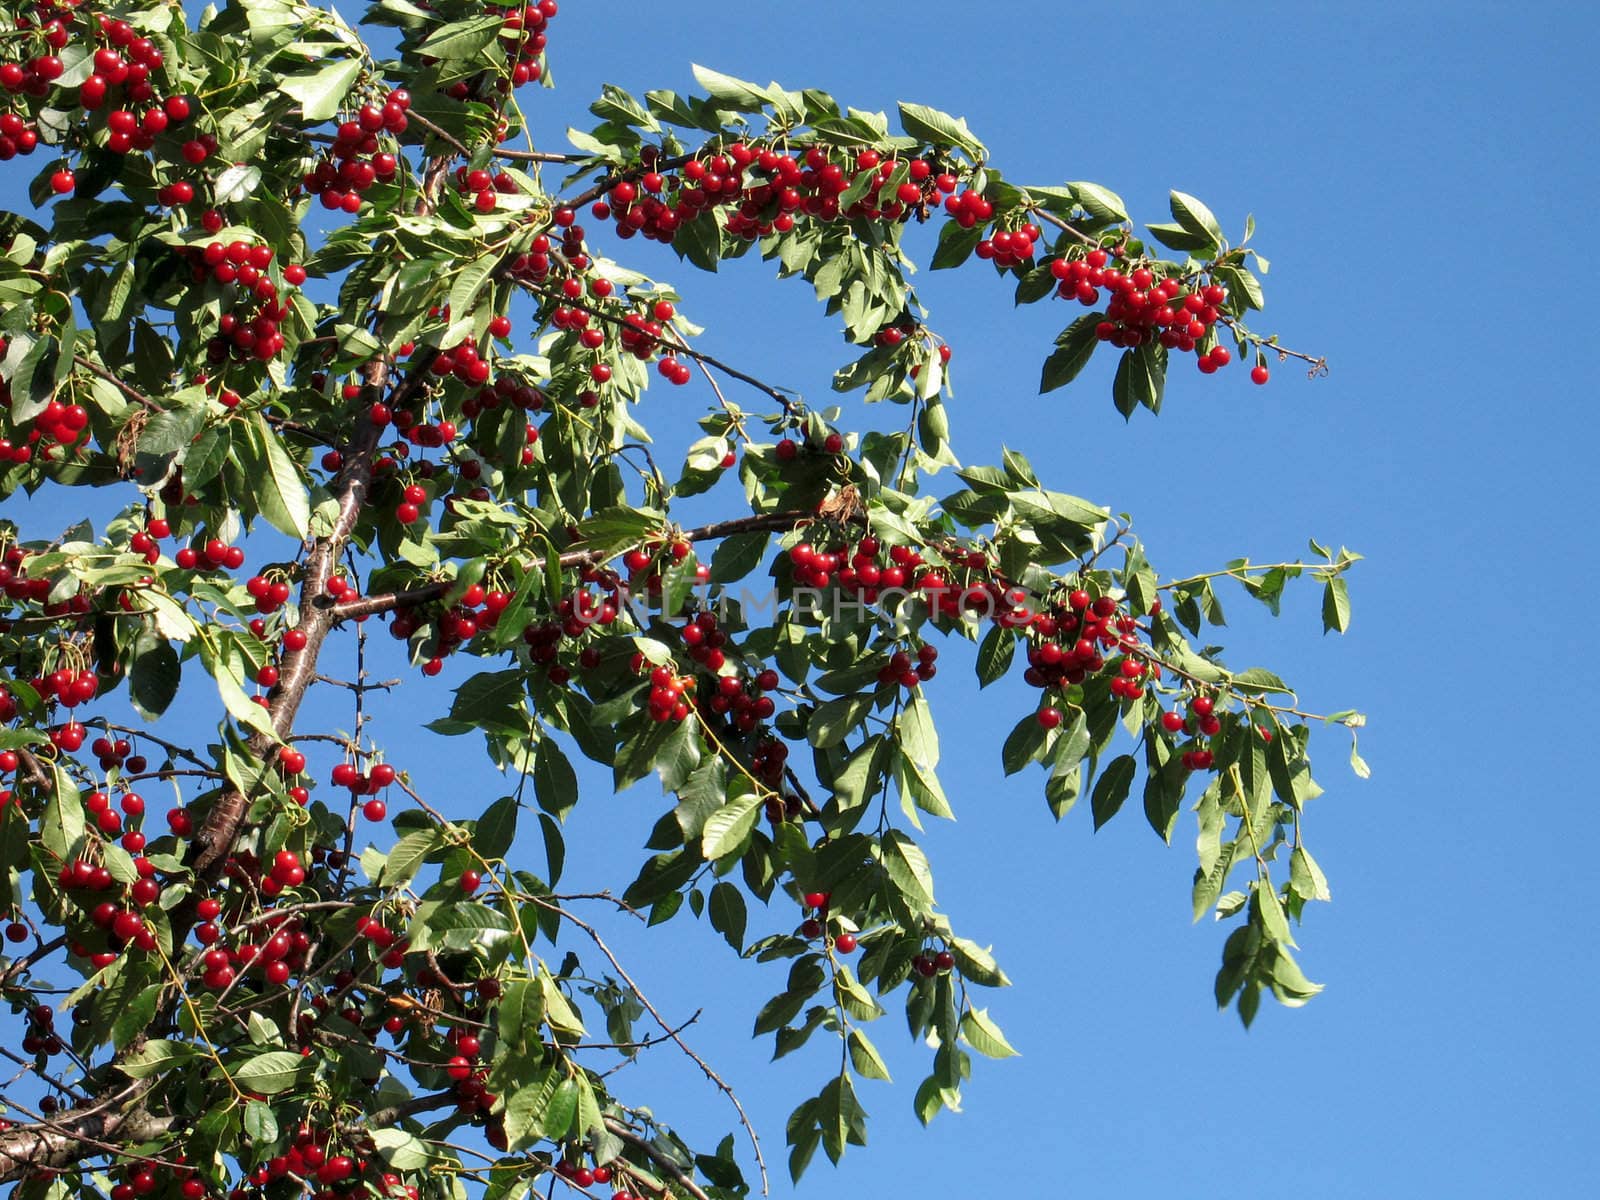 Red cherries on a tree with blue sky as a background